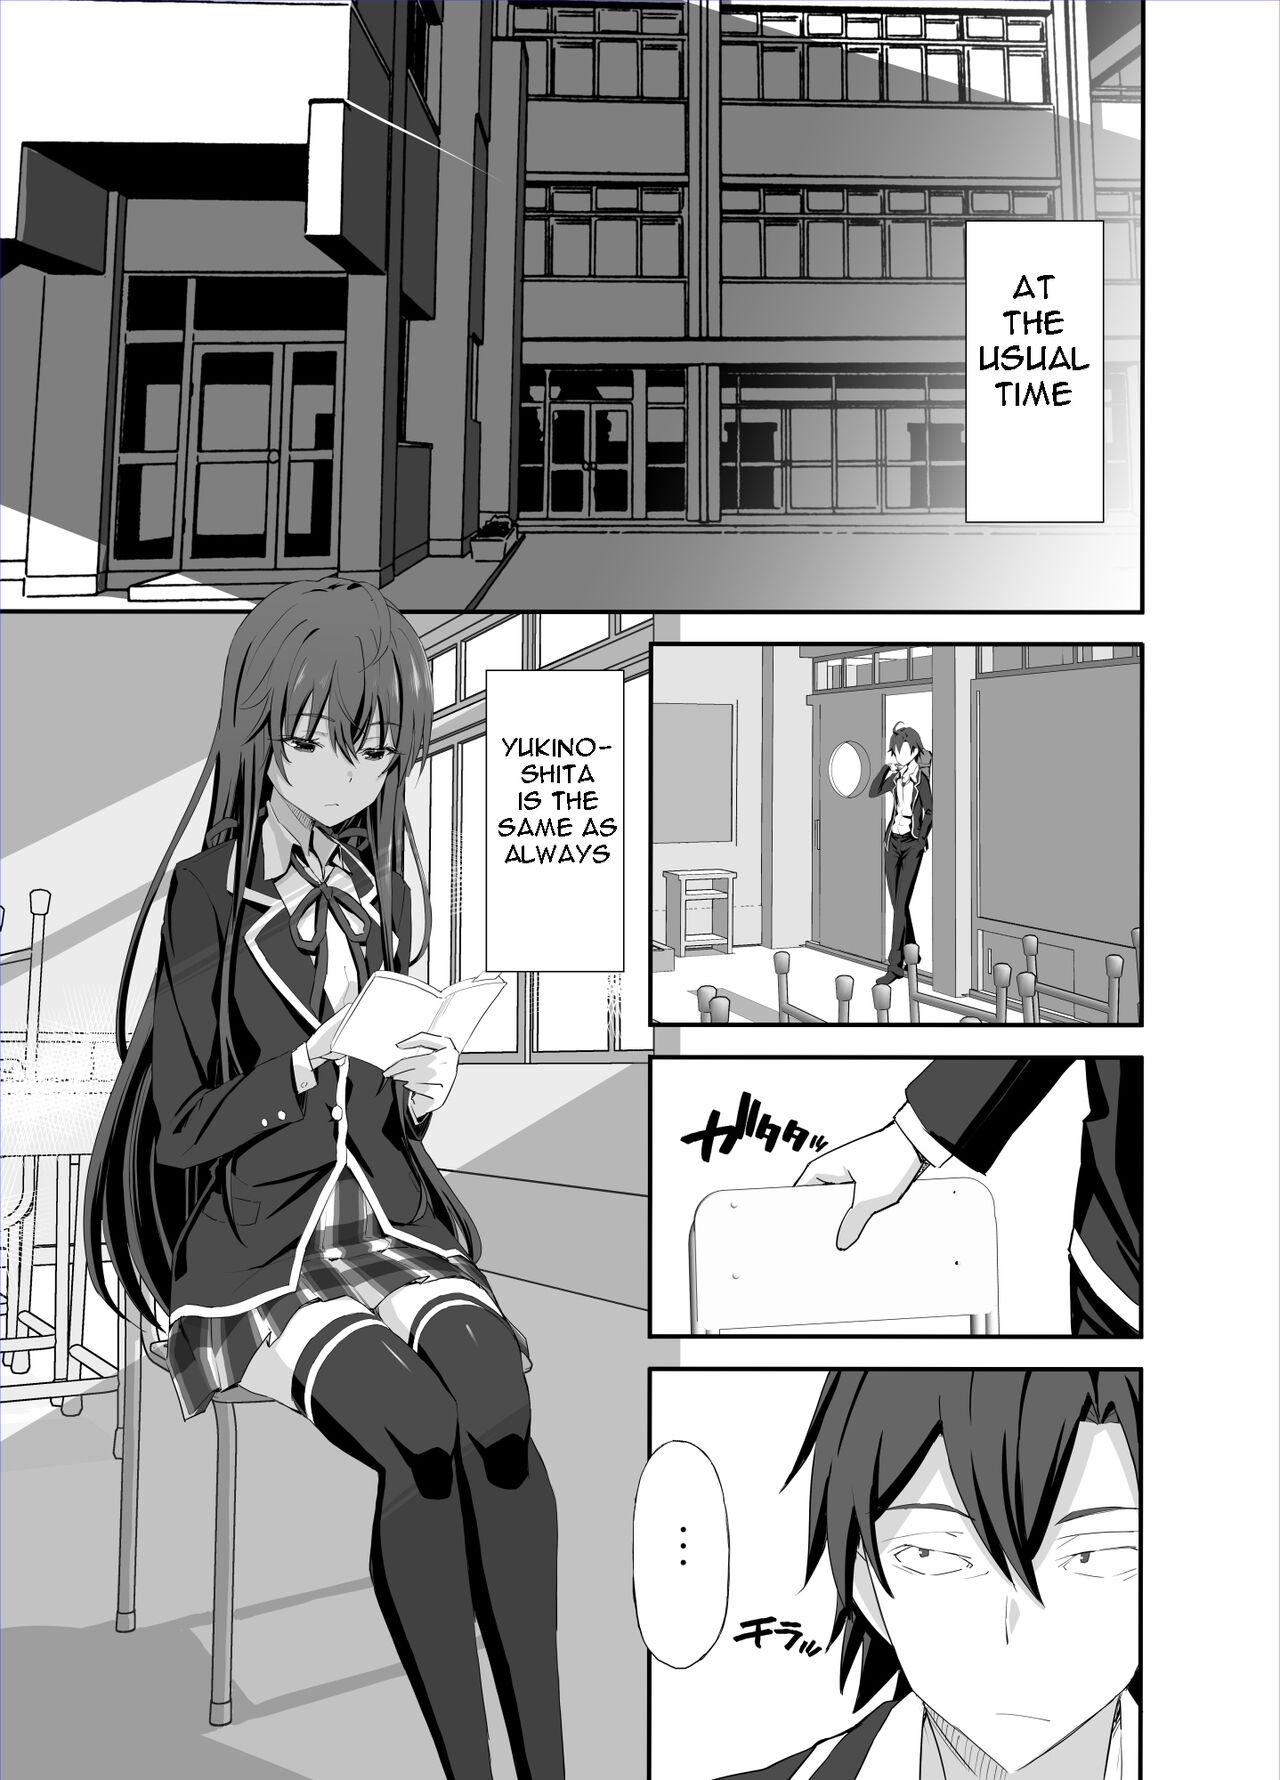 Douse Ore no Seishun Love Come wa DT de Owatteiru. | My Teen Romantic Comedy Ended With Me Being A Virgin Anyway. 29